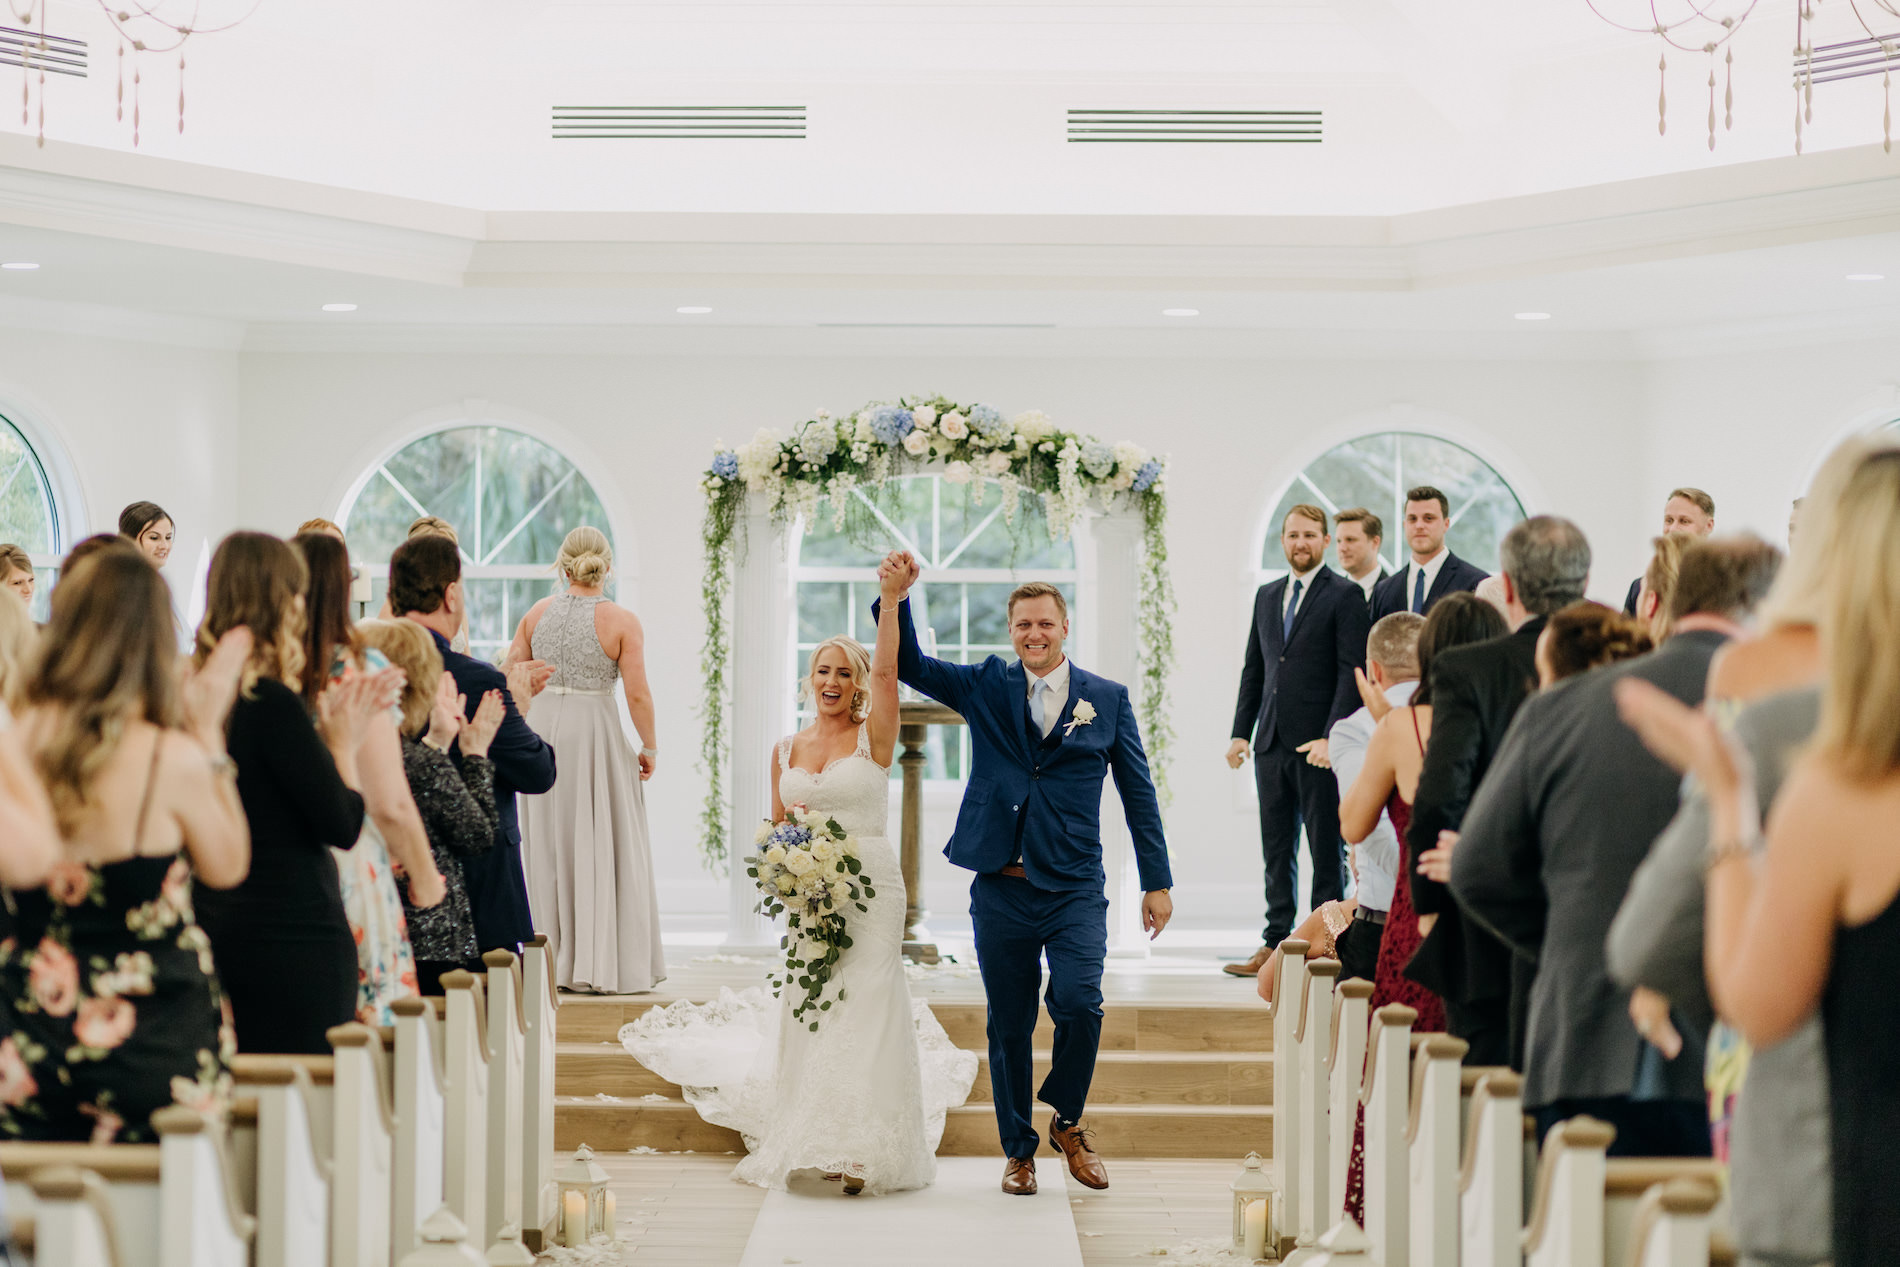 Classic Florida Bride and Groom After Saying I Do Excited Wedding Portrait | Tampa Wedding Ceremony Venue Harborside Chapel